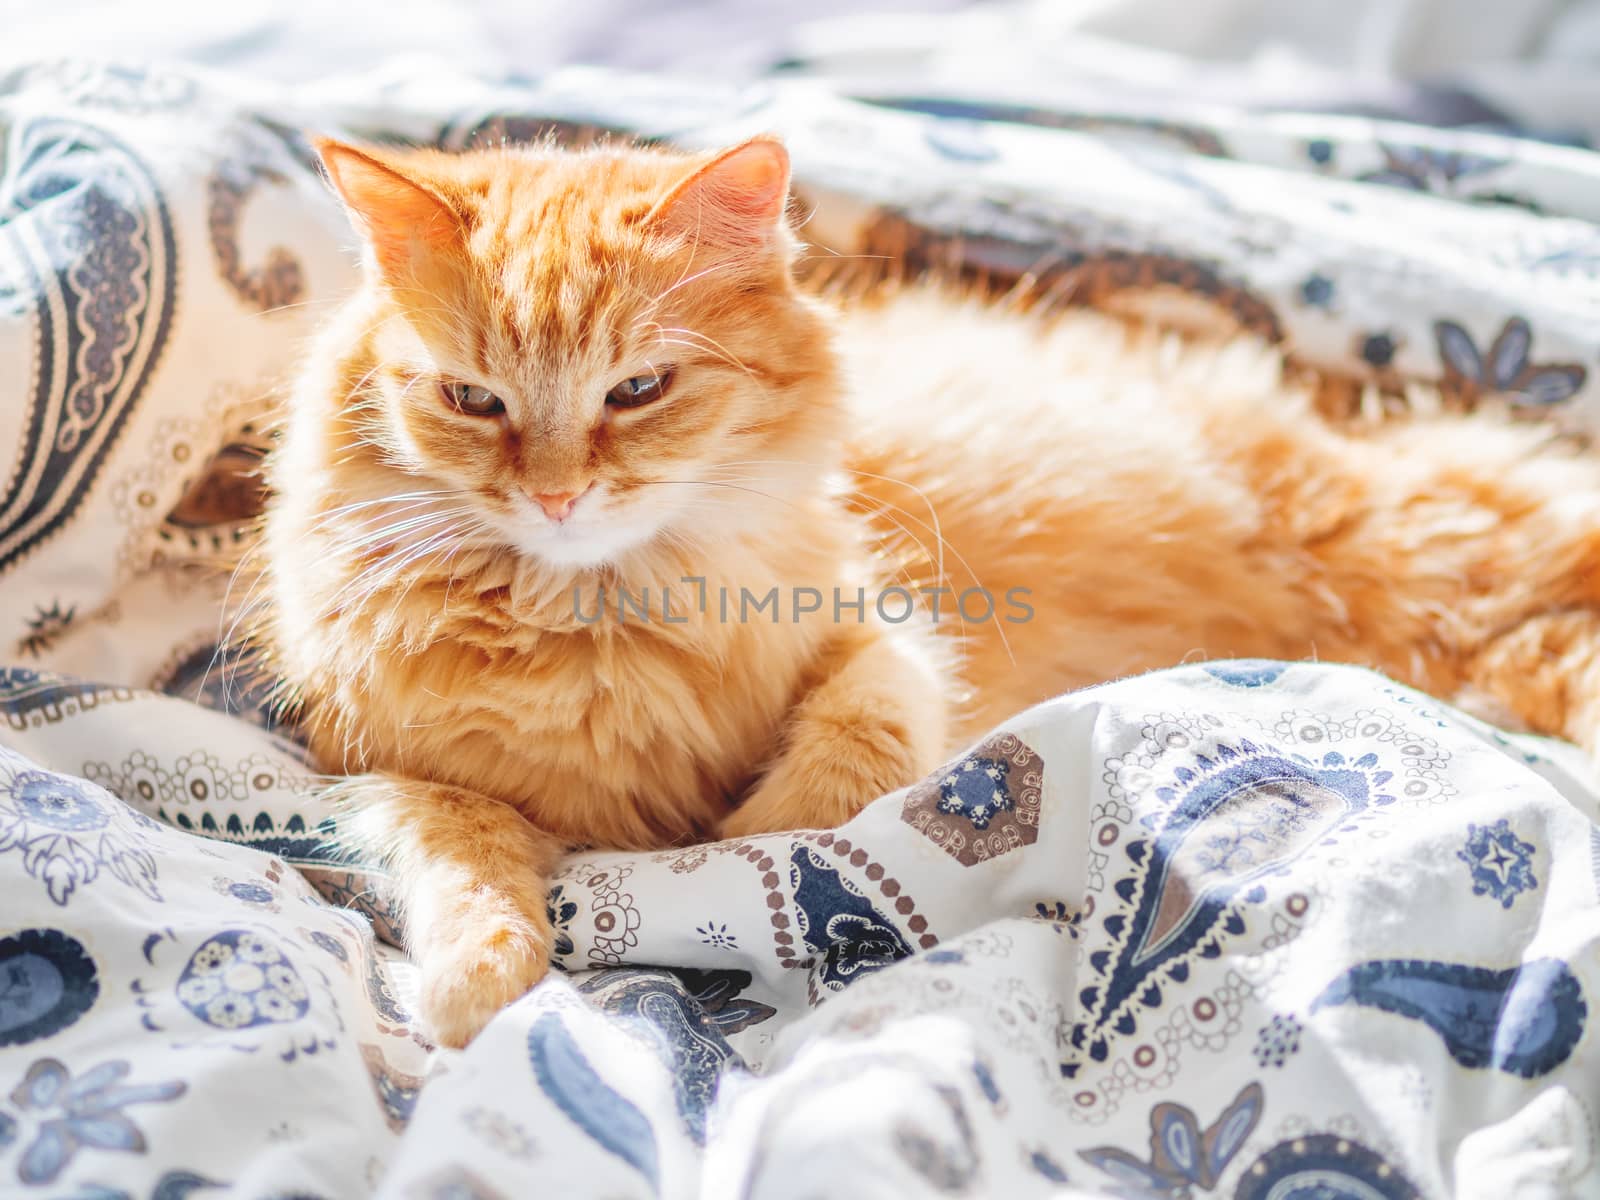 Cute ginger cat lying in bed. Fluffy pet looks curiously. Cozy home background.